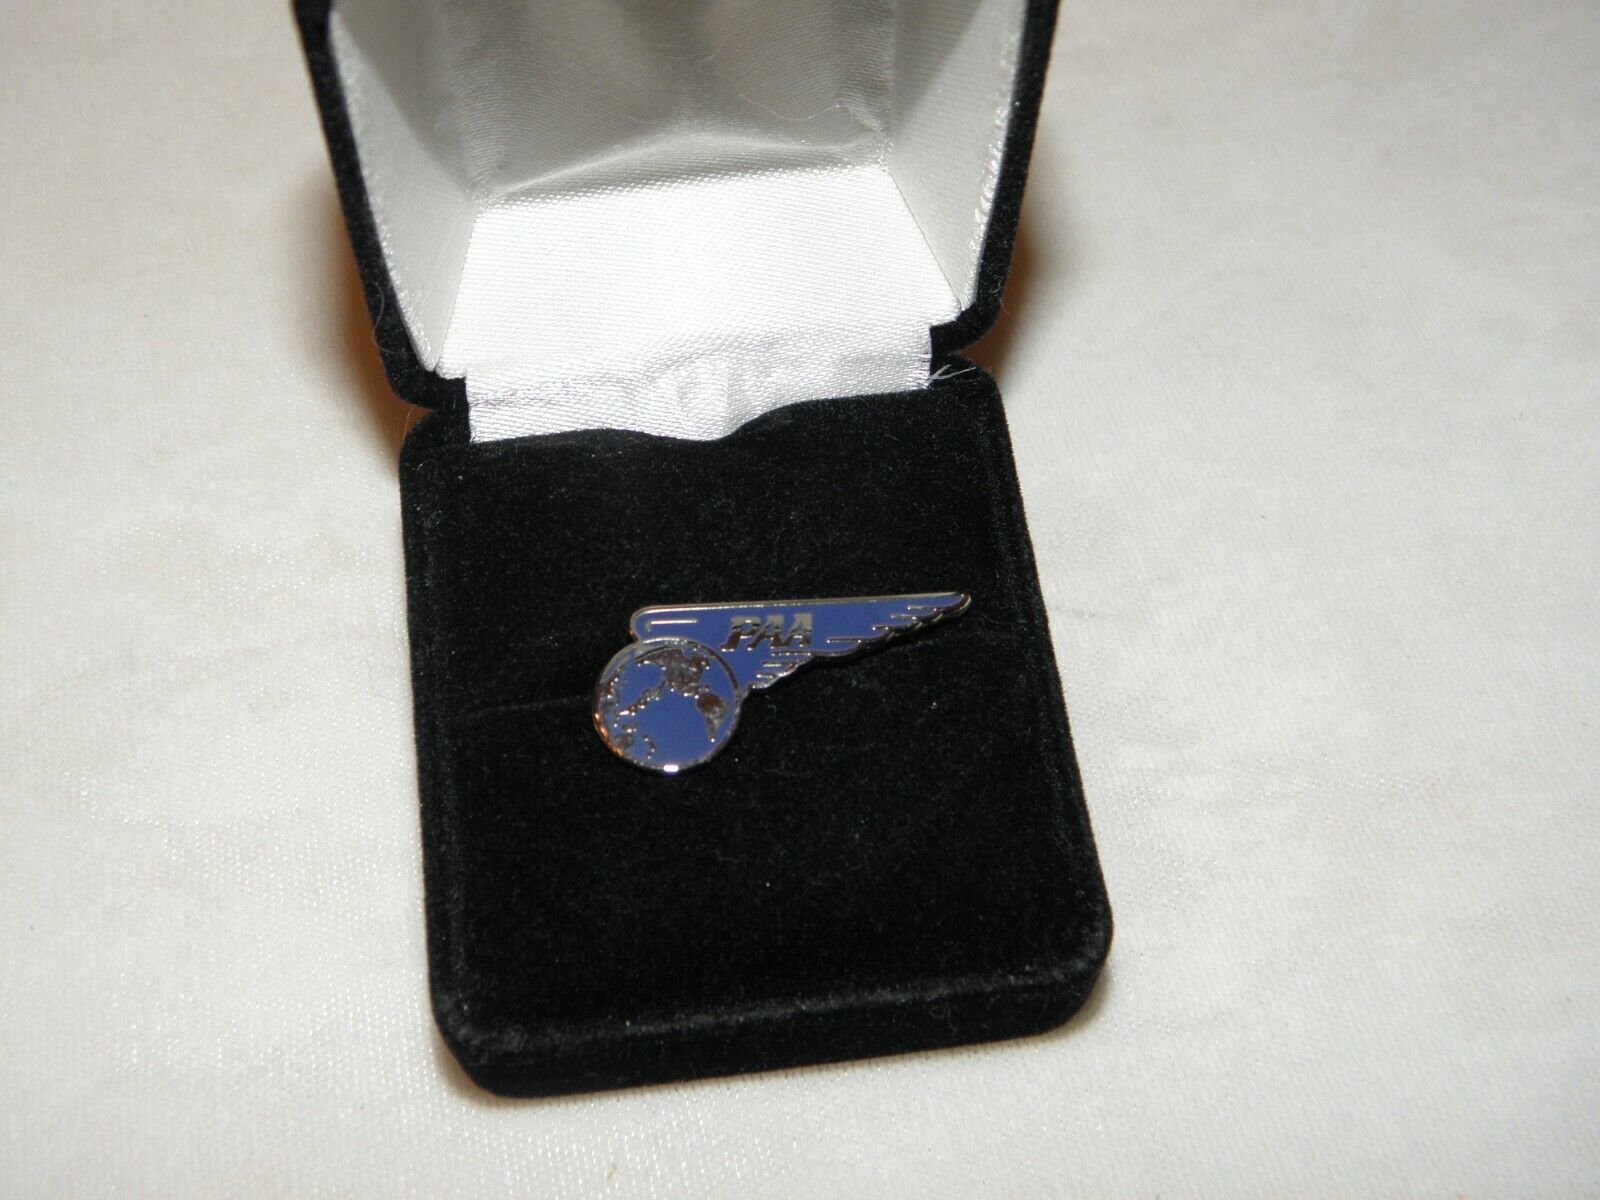 PAN AM AIRLINE PIN PACIFIC REGION GOLDTONE WING PILOT GIFT